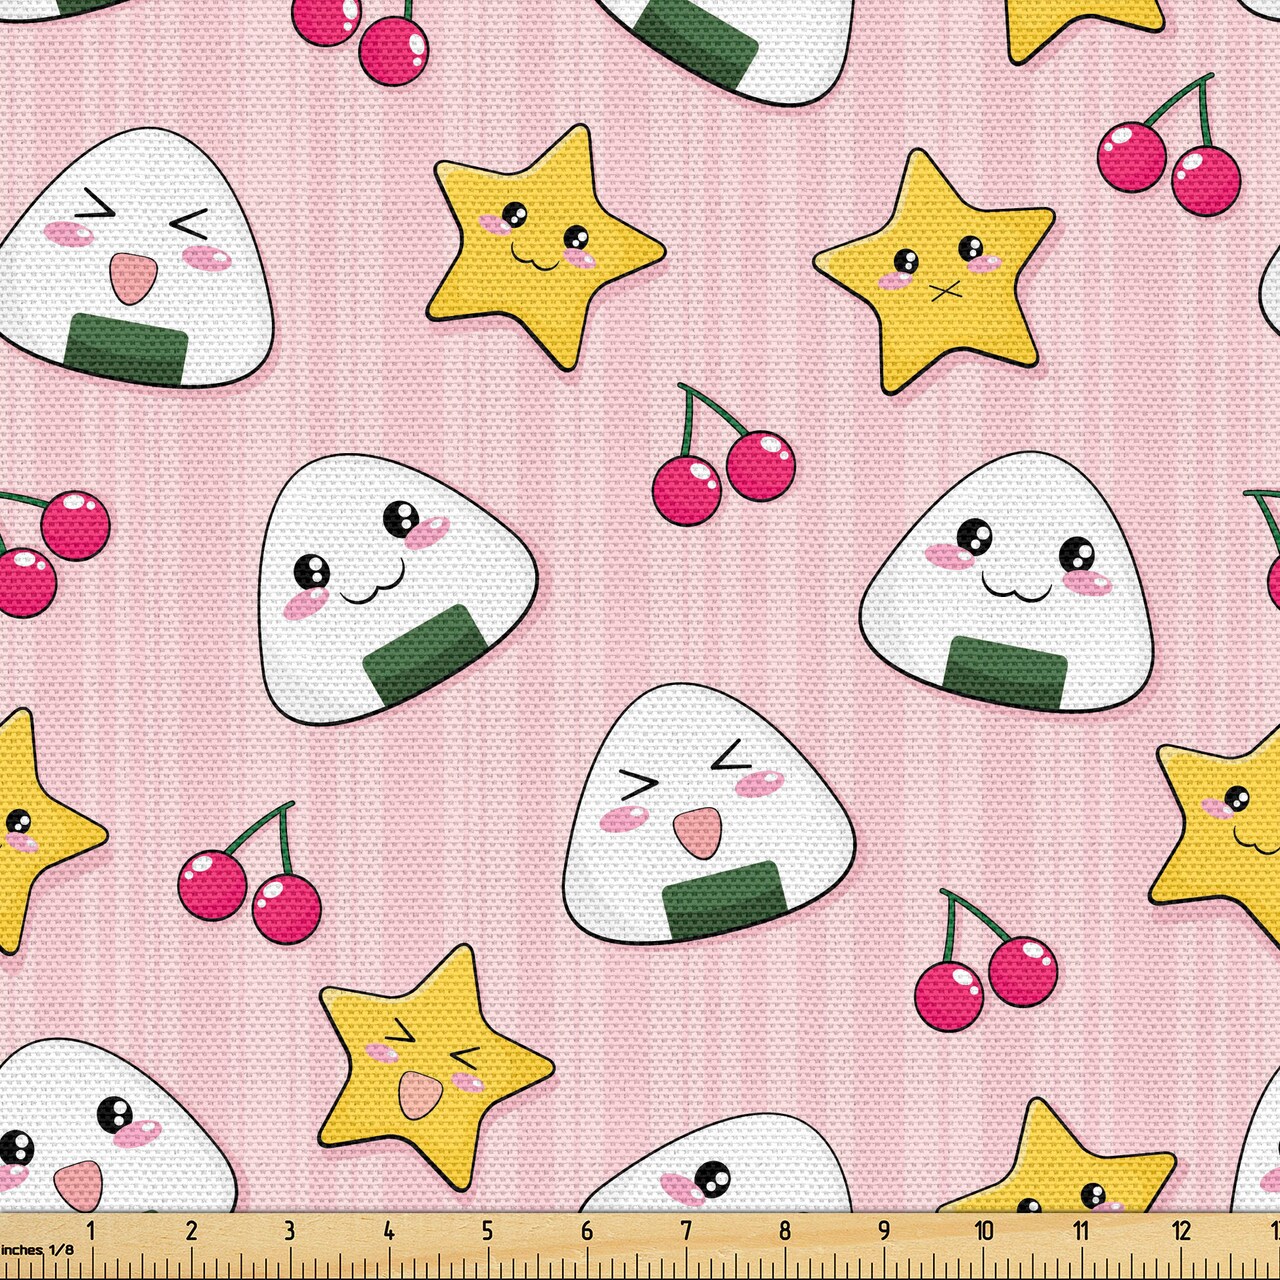 Ambesonne Japan Fabric by The Yard, Japanese Foods Rice Ball Cherries Kawaii Anime Pattern Design, Decorative Fabric for Upholstery and Home Accents, 2 Yards, Pink